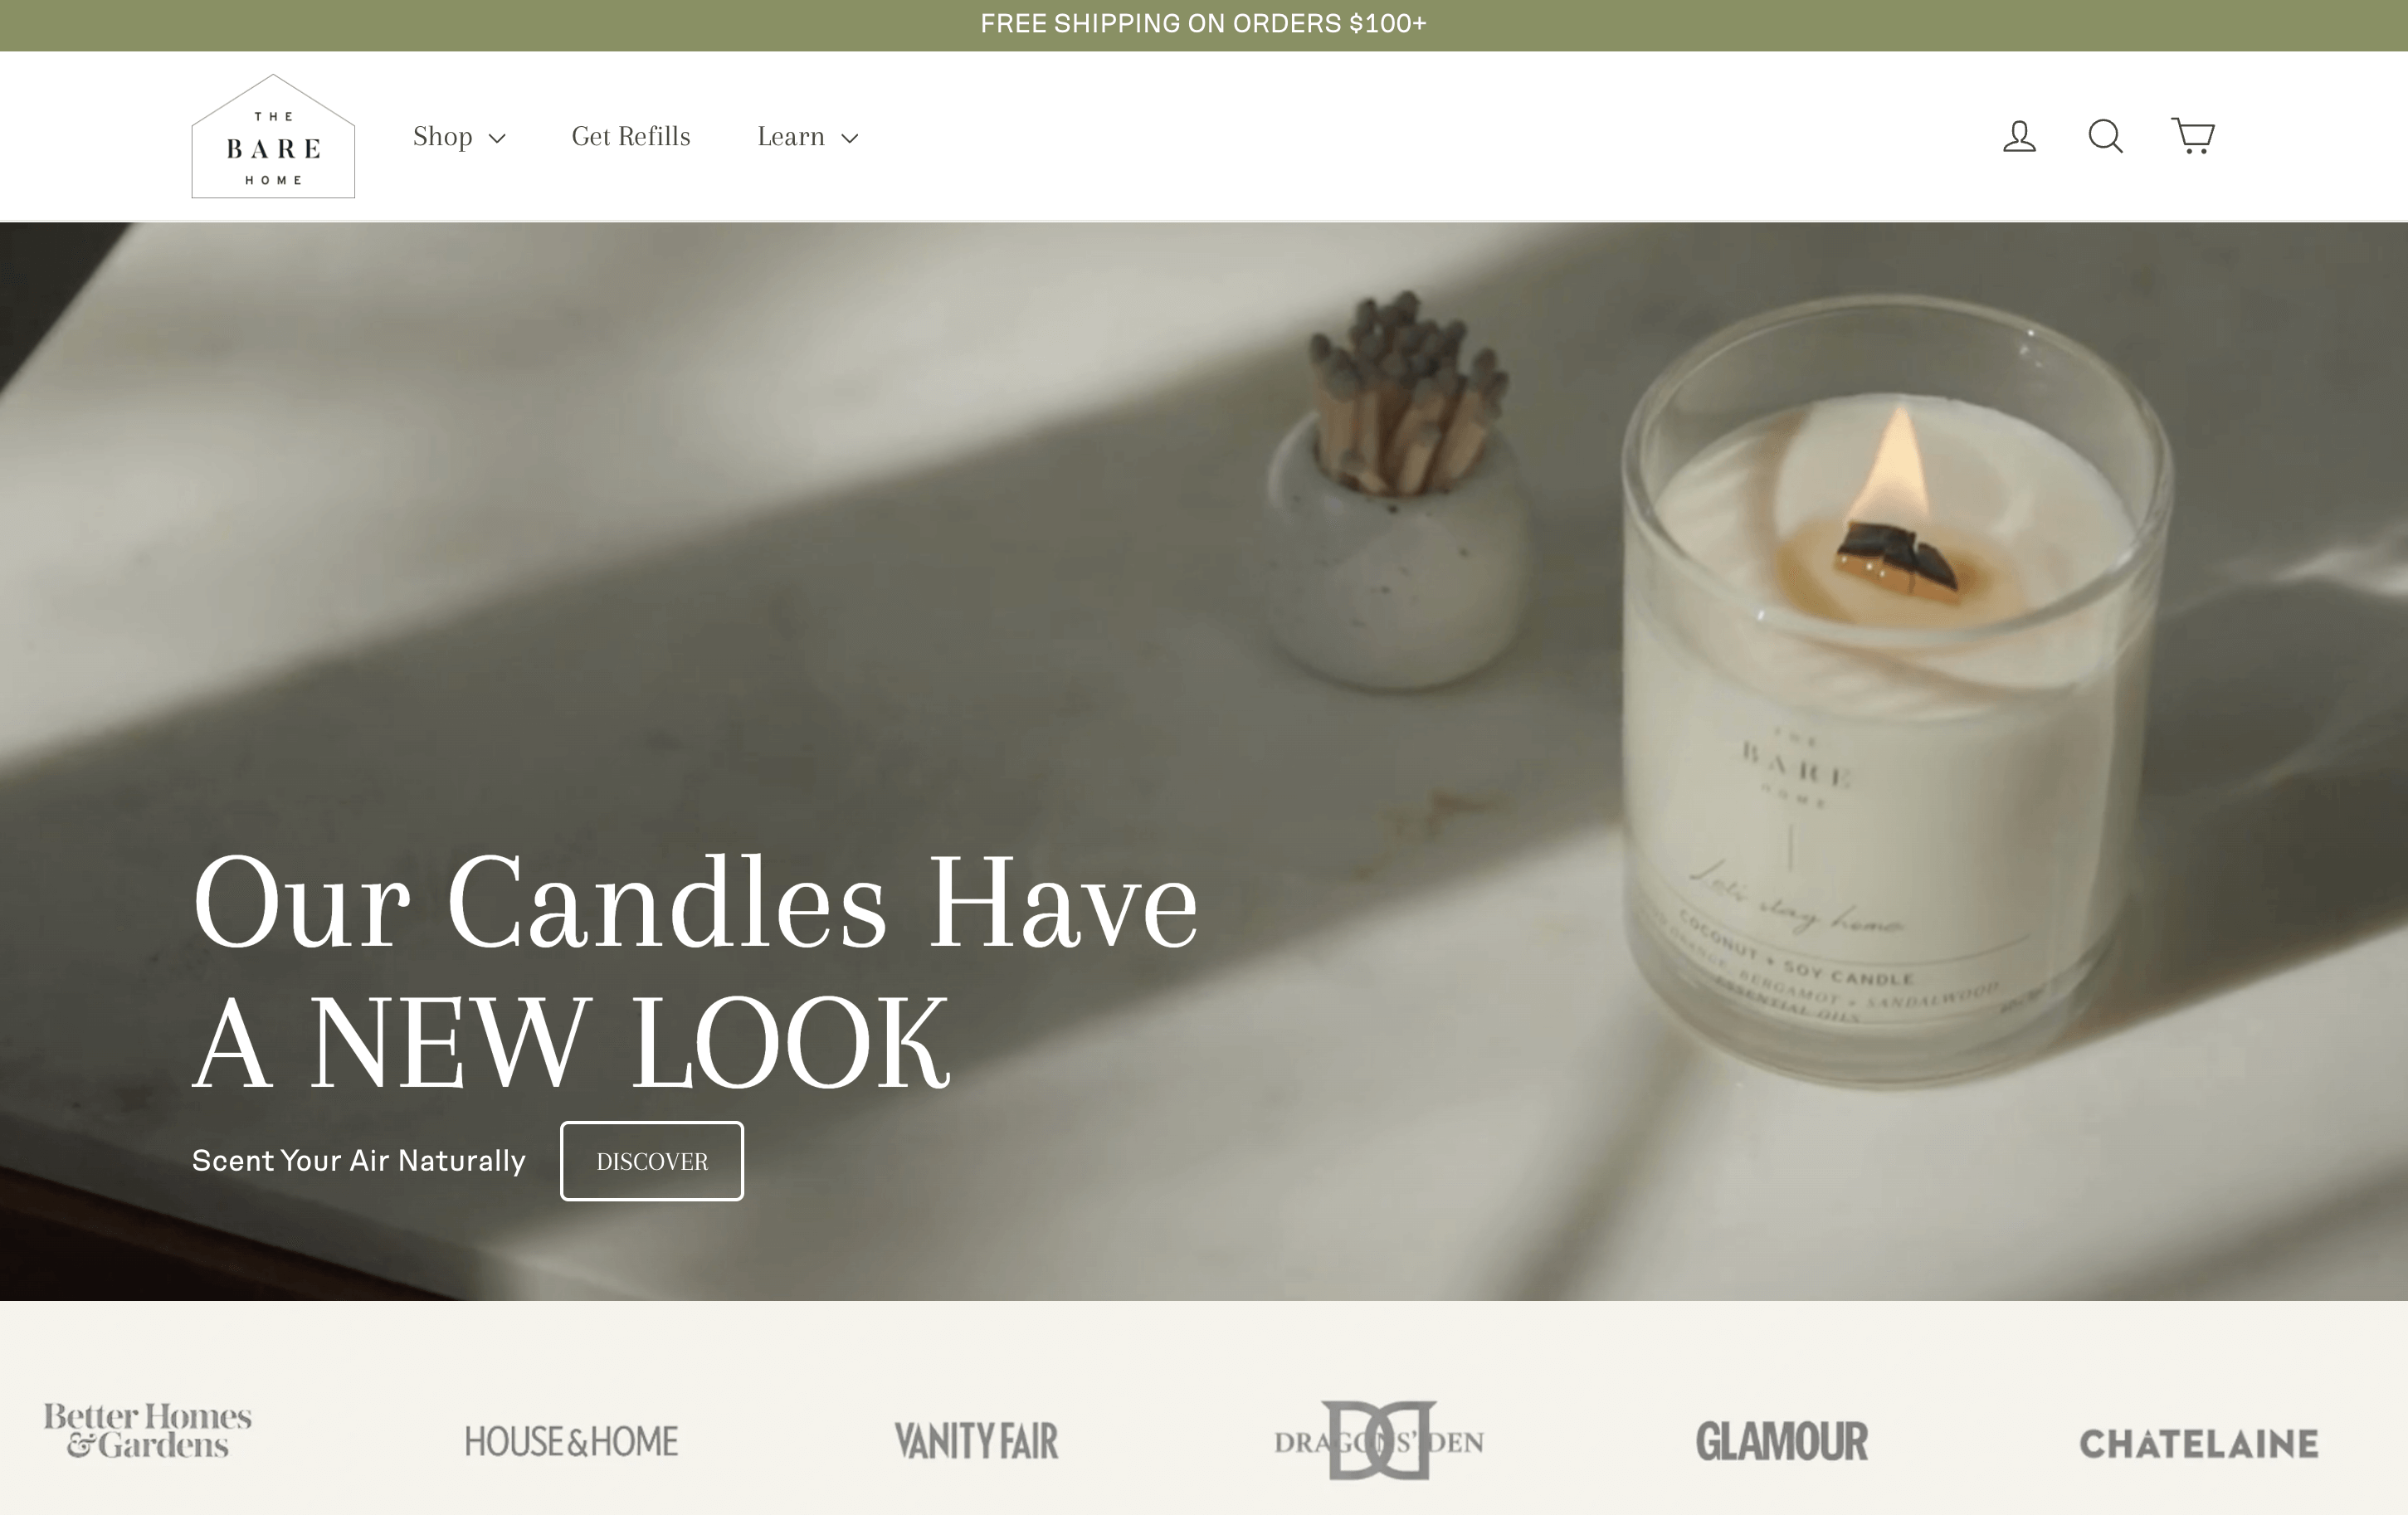 A screenshot of the homepage showing a branded candle. 